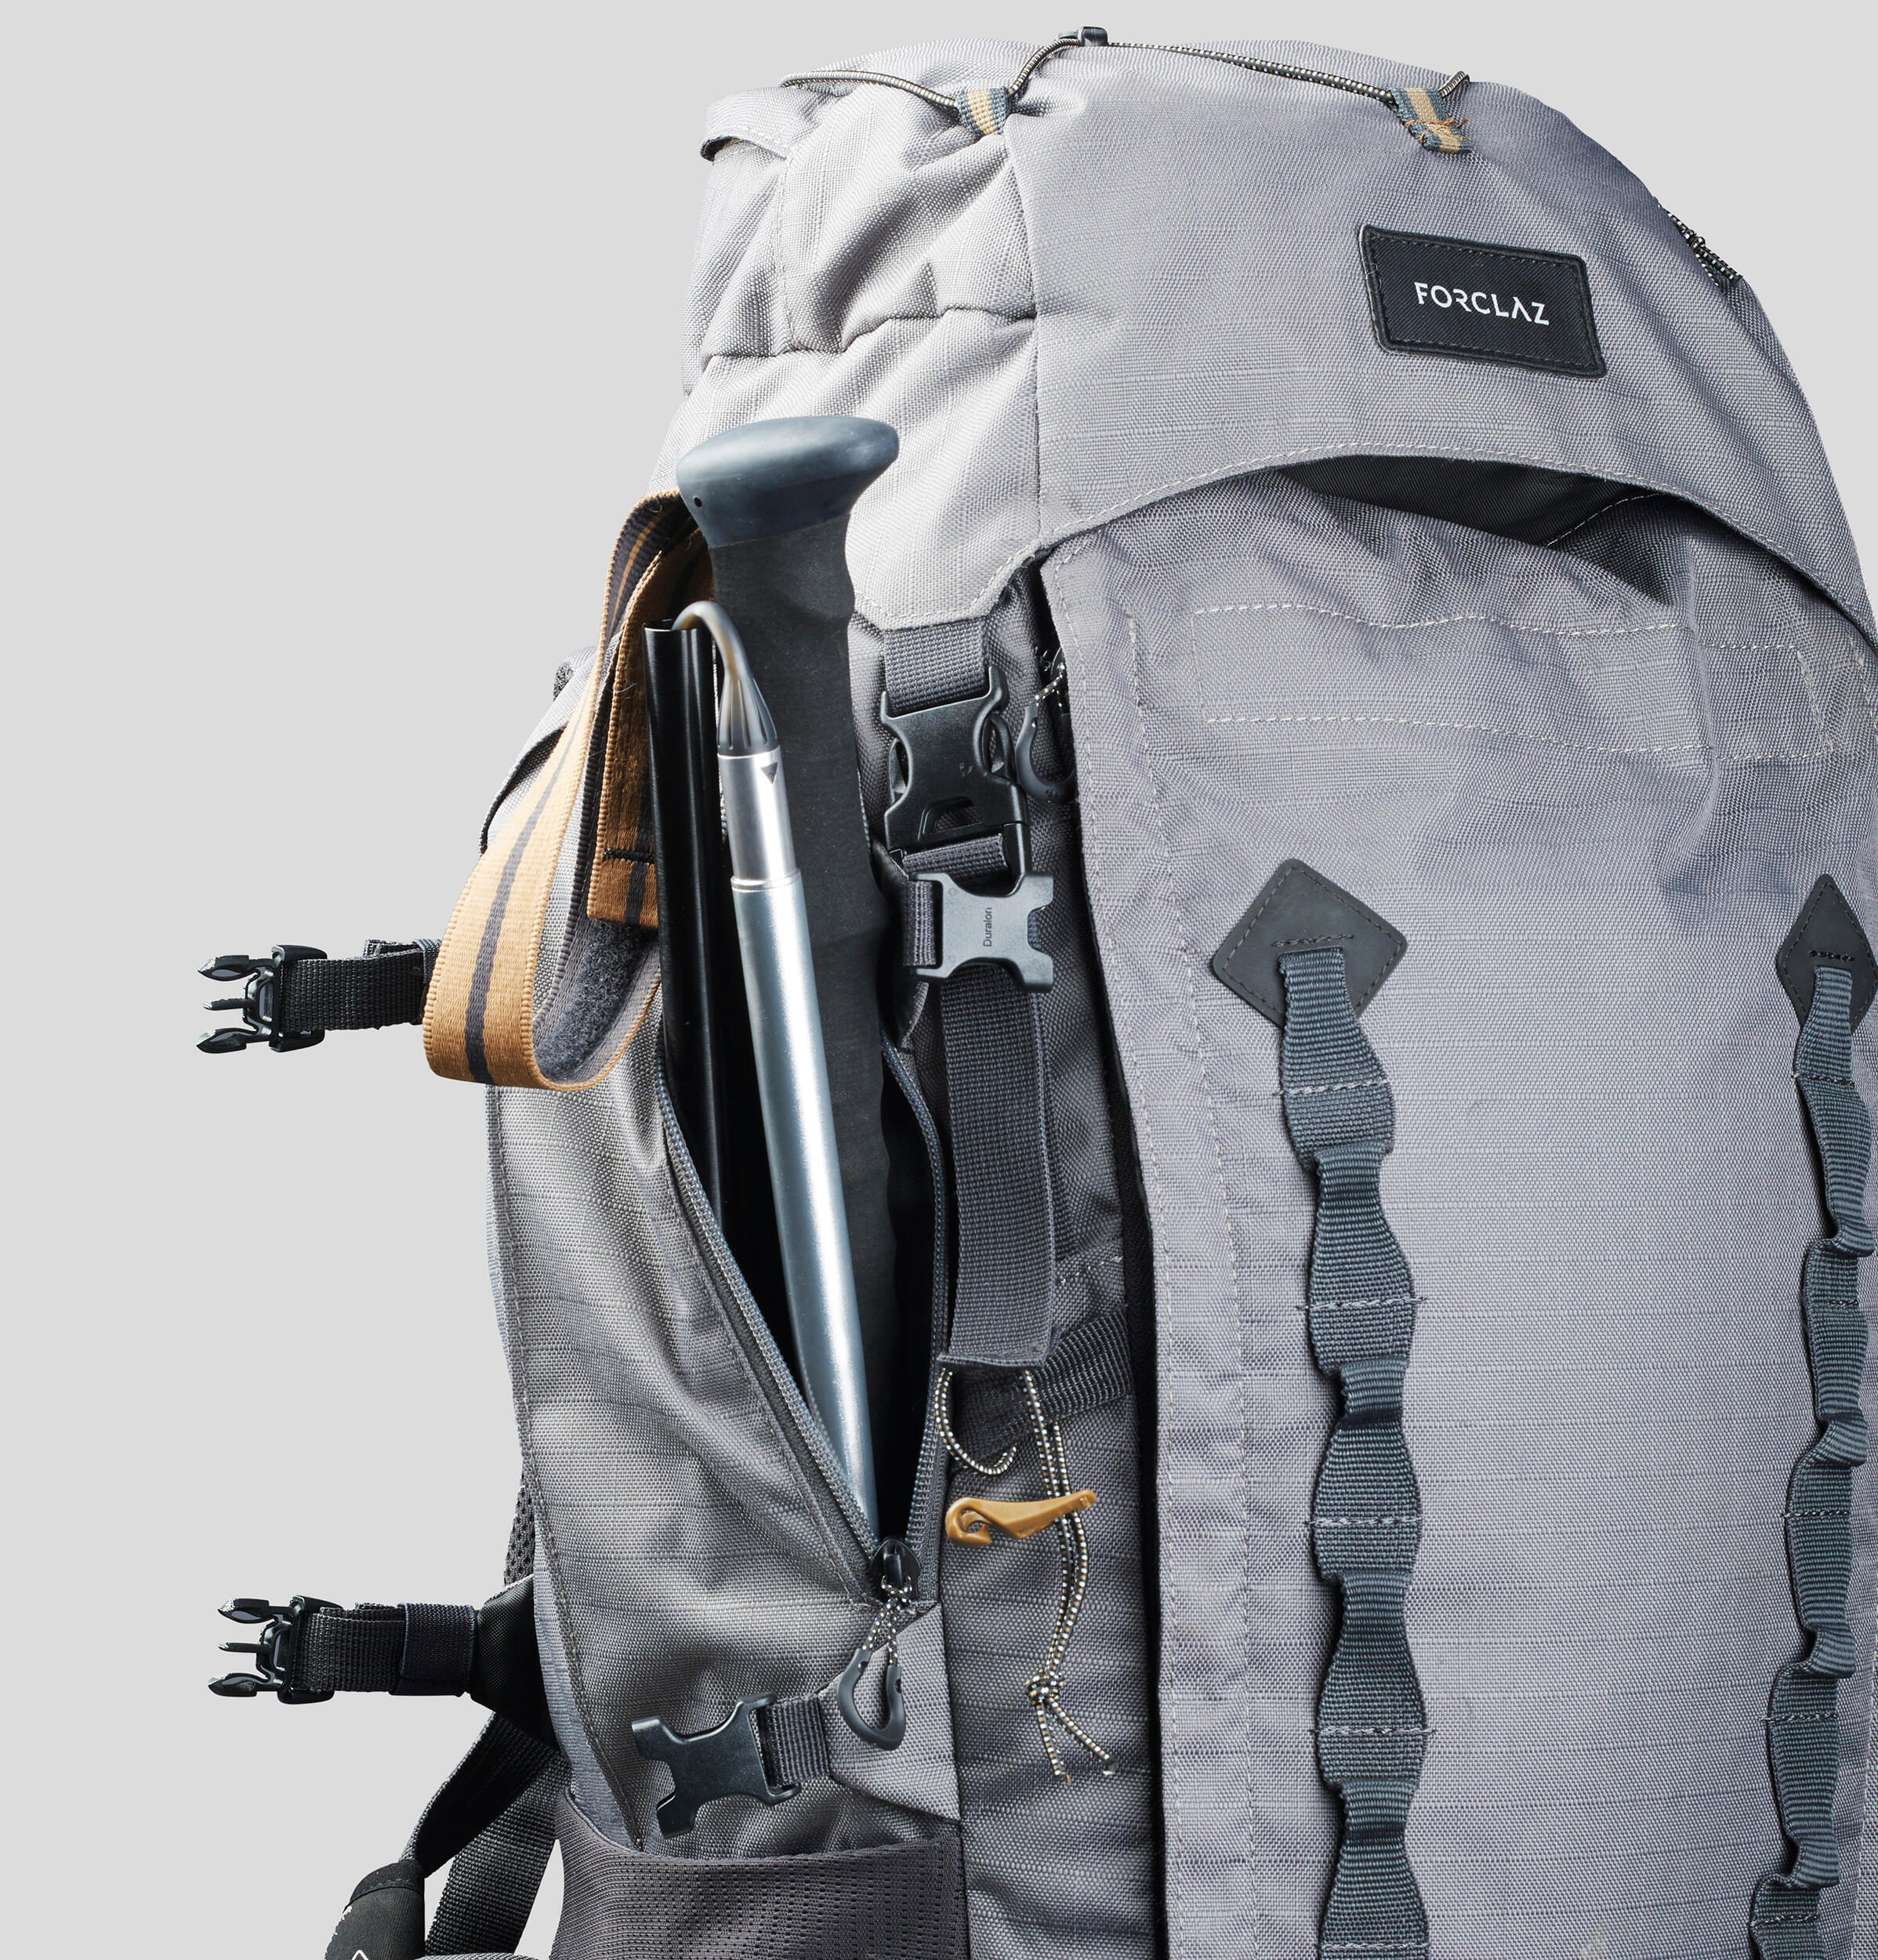 Where to hang your hiking poles on a backpack